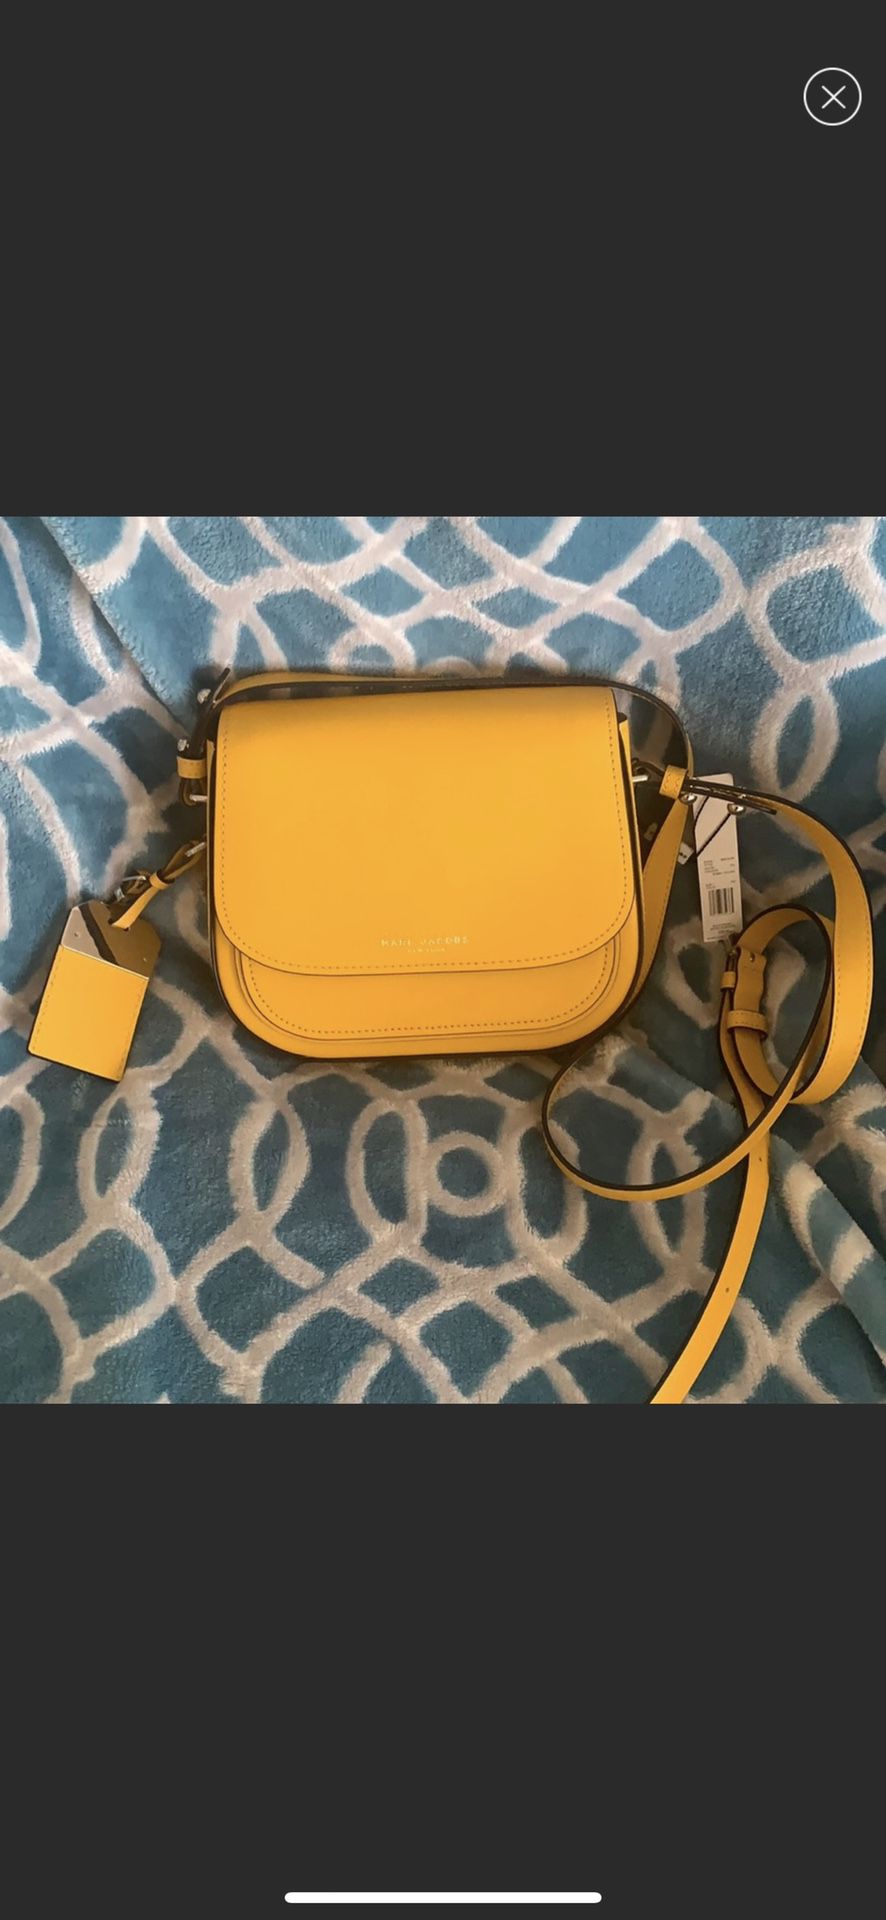 Never Used Marc Jacobs Bag